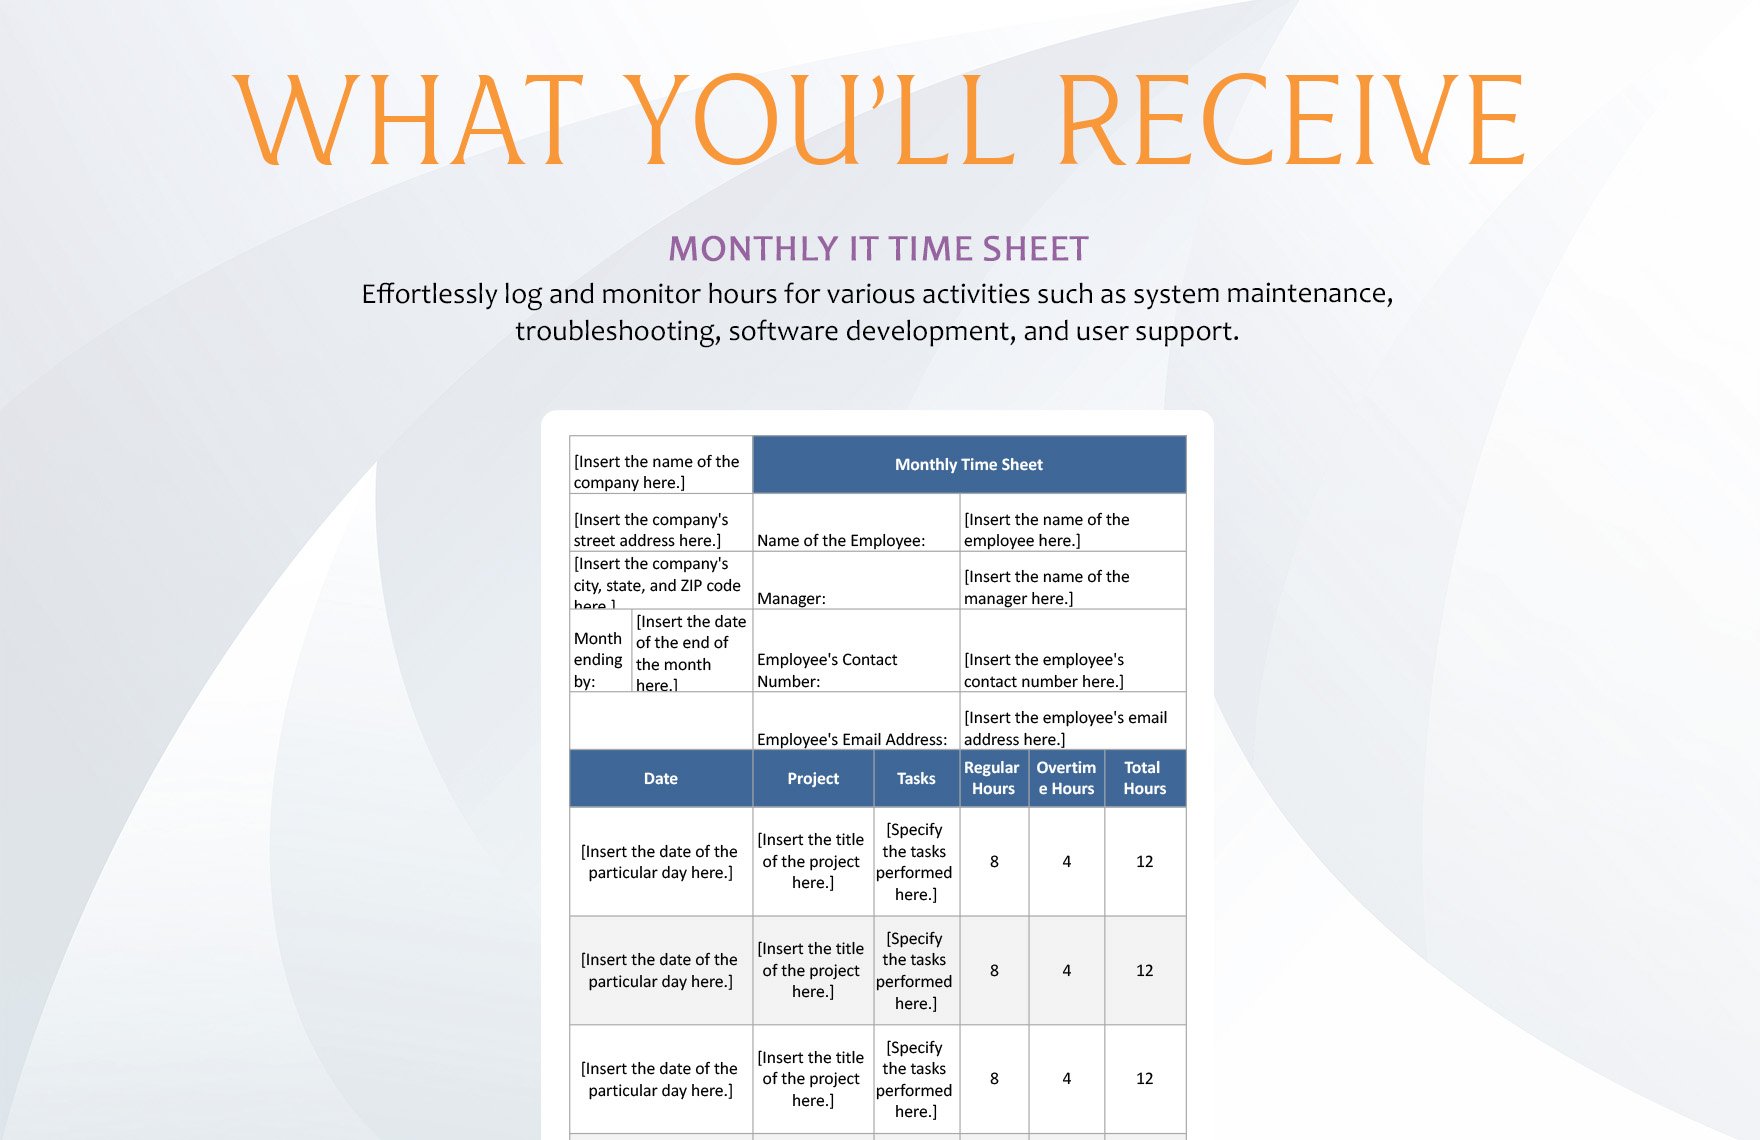 Monthly IT Time Sheet Template